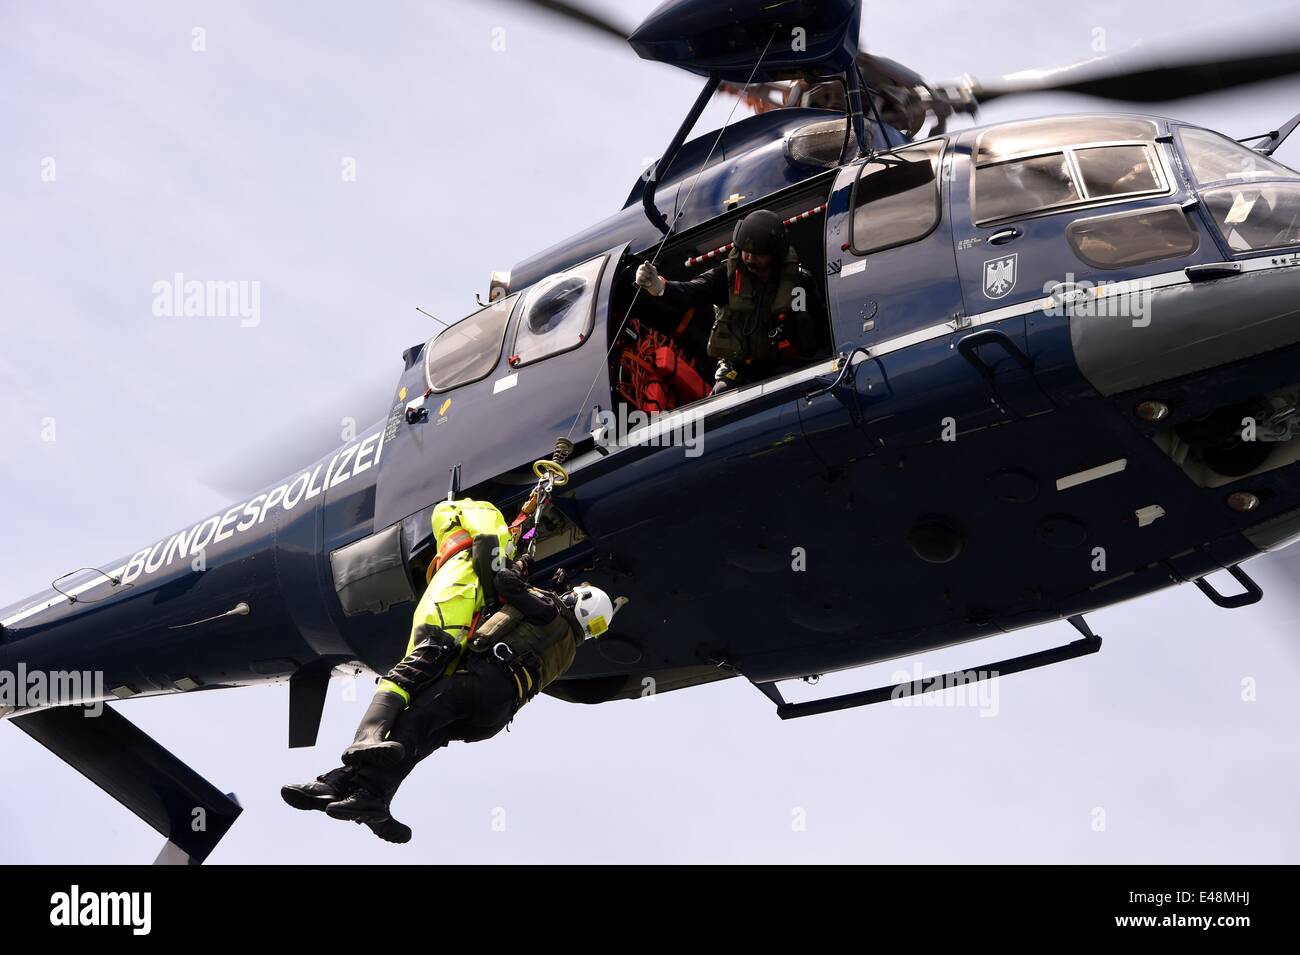 Neustadt, Germany. 17th June, 2014. A Eurocopter EC 155 'winches' a crew member onto the police boats Neustrelitz on the Baltic Sea off of Neustadt, Germany, 17 June 2014. The German sea police are celebrating the 50th birthday. Photo: CARSTEN REHDER/dpa/Alamy Live News Stock Photo